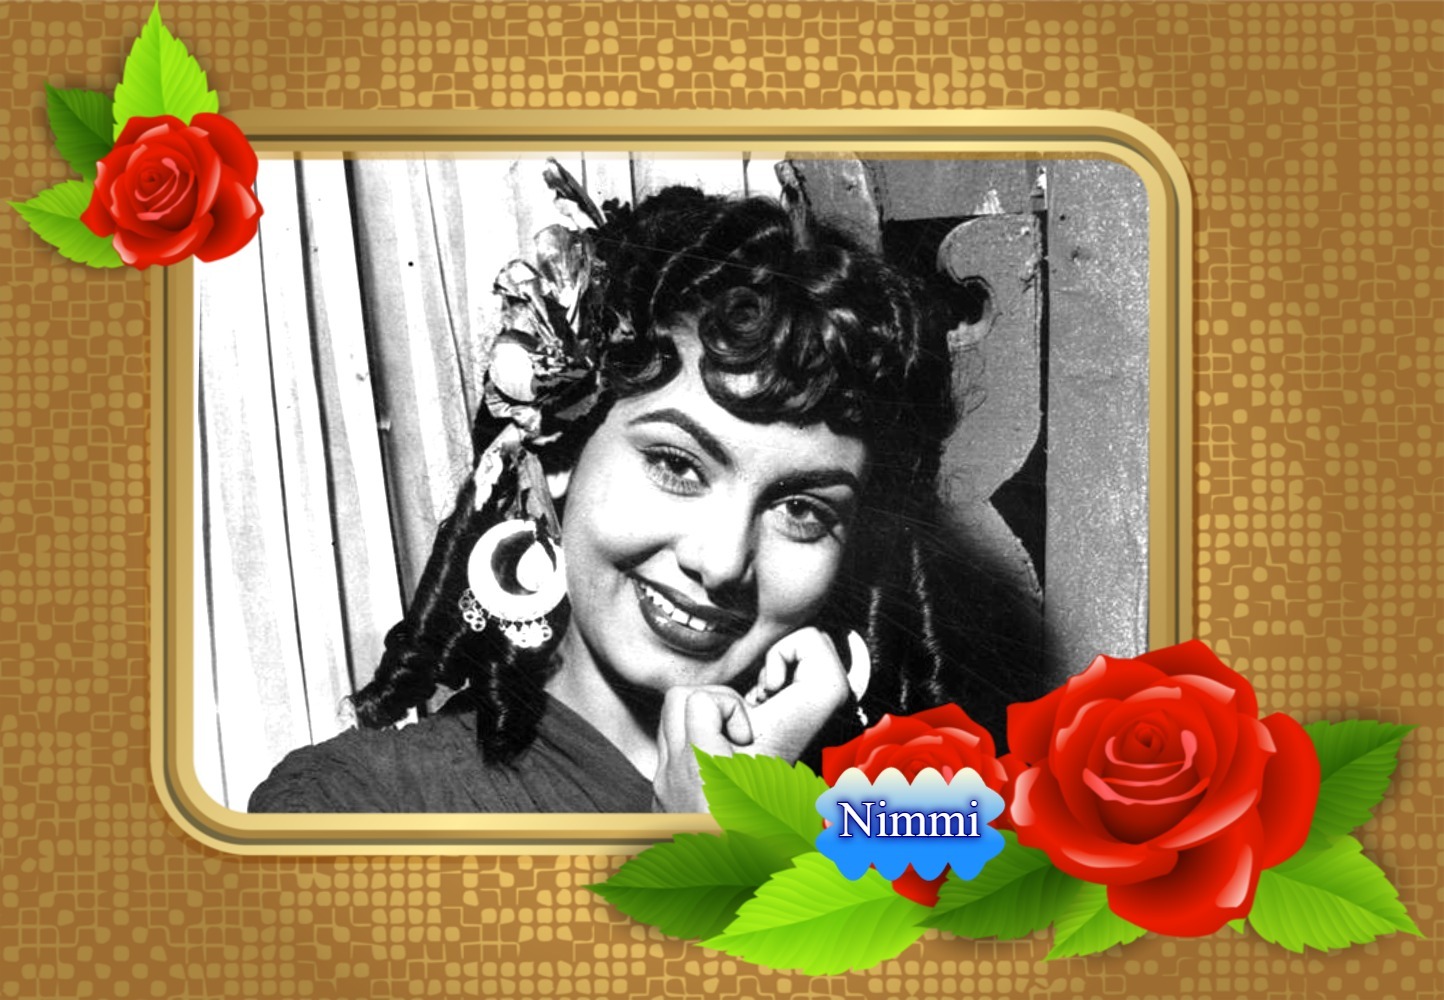 You are currently viewing “Simplicity & Humility Personified Heart-Throb: Nimmi”